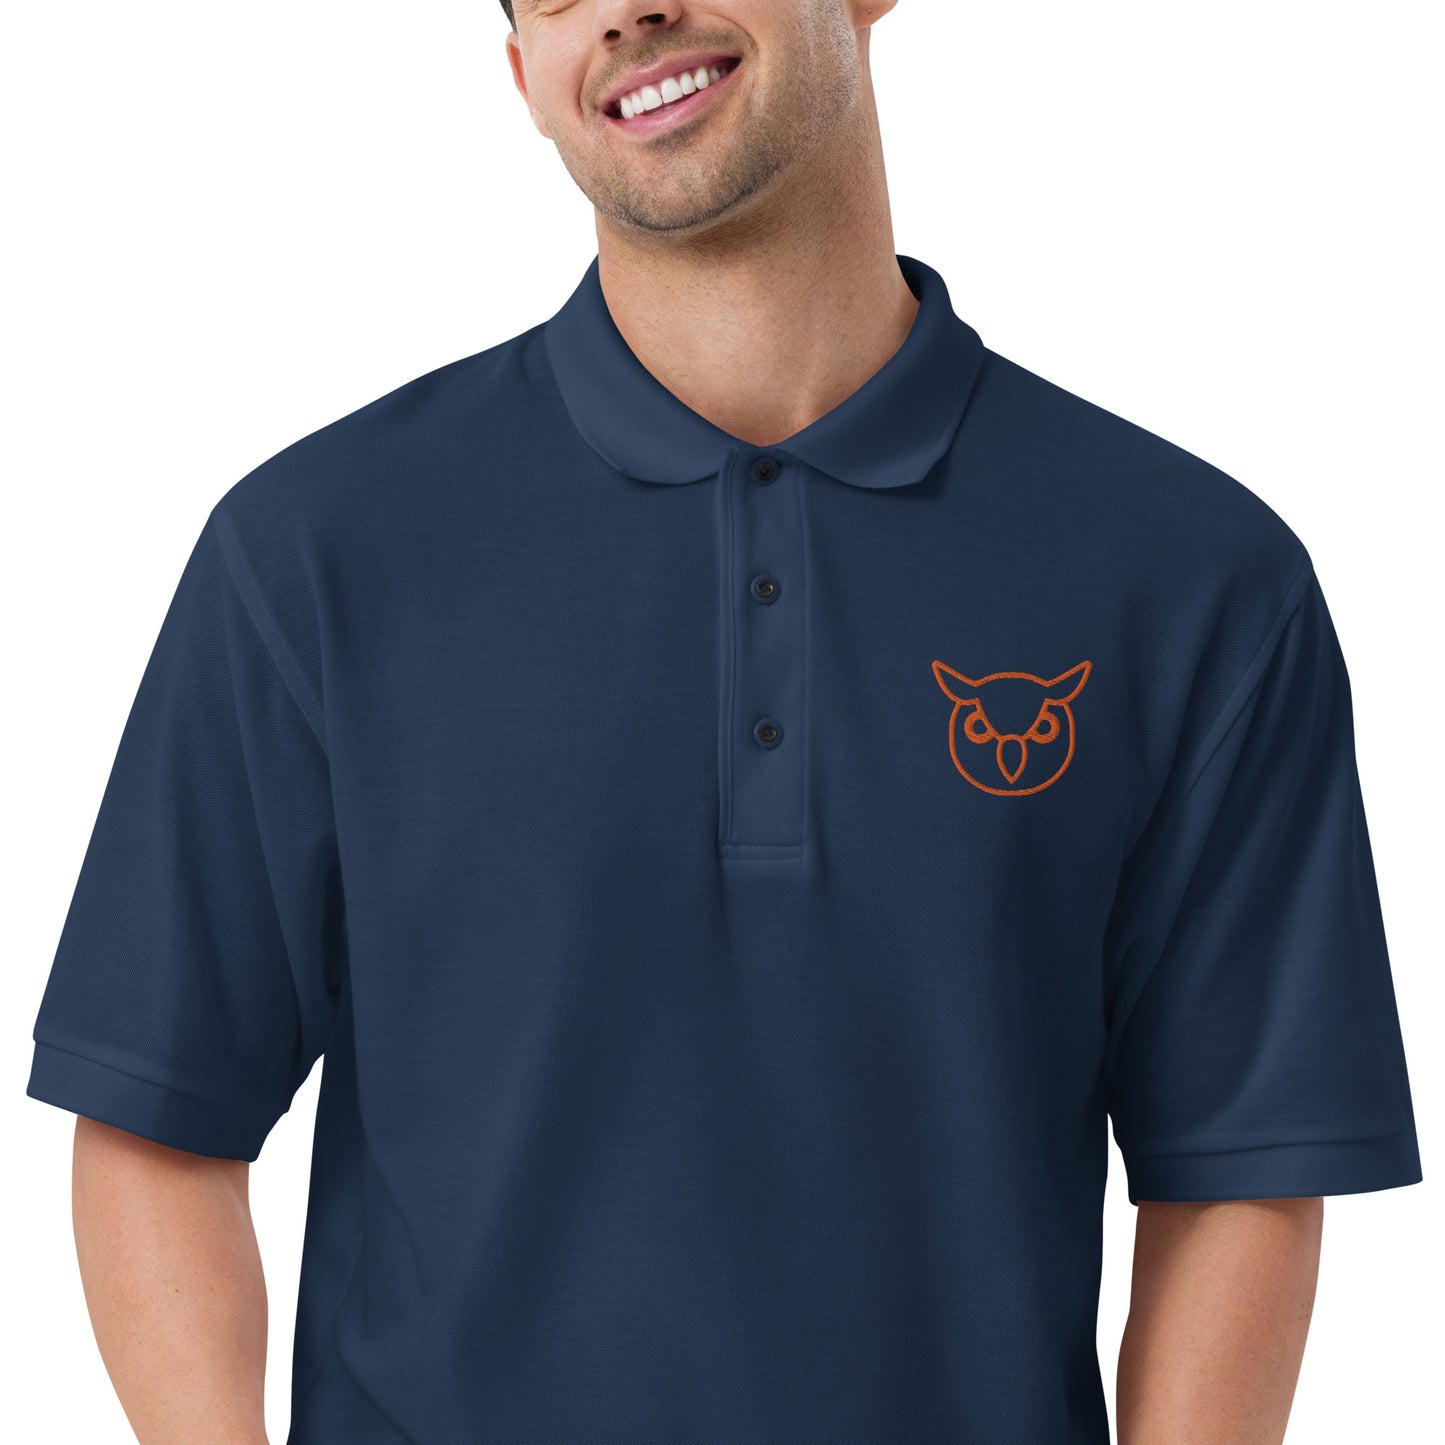 Men with navy poloshirt with on front a owl in brown embroidered